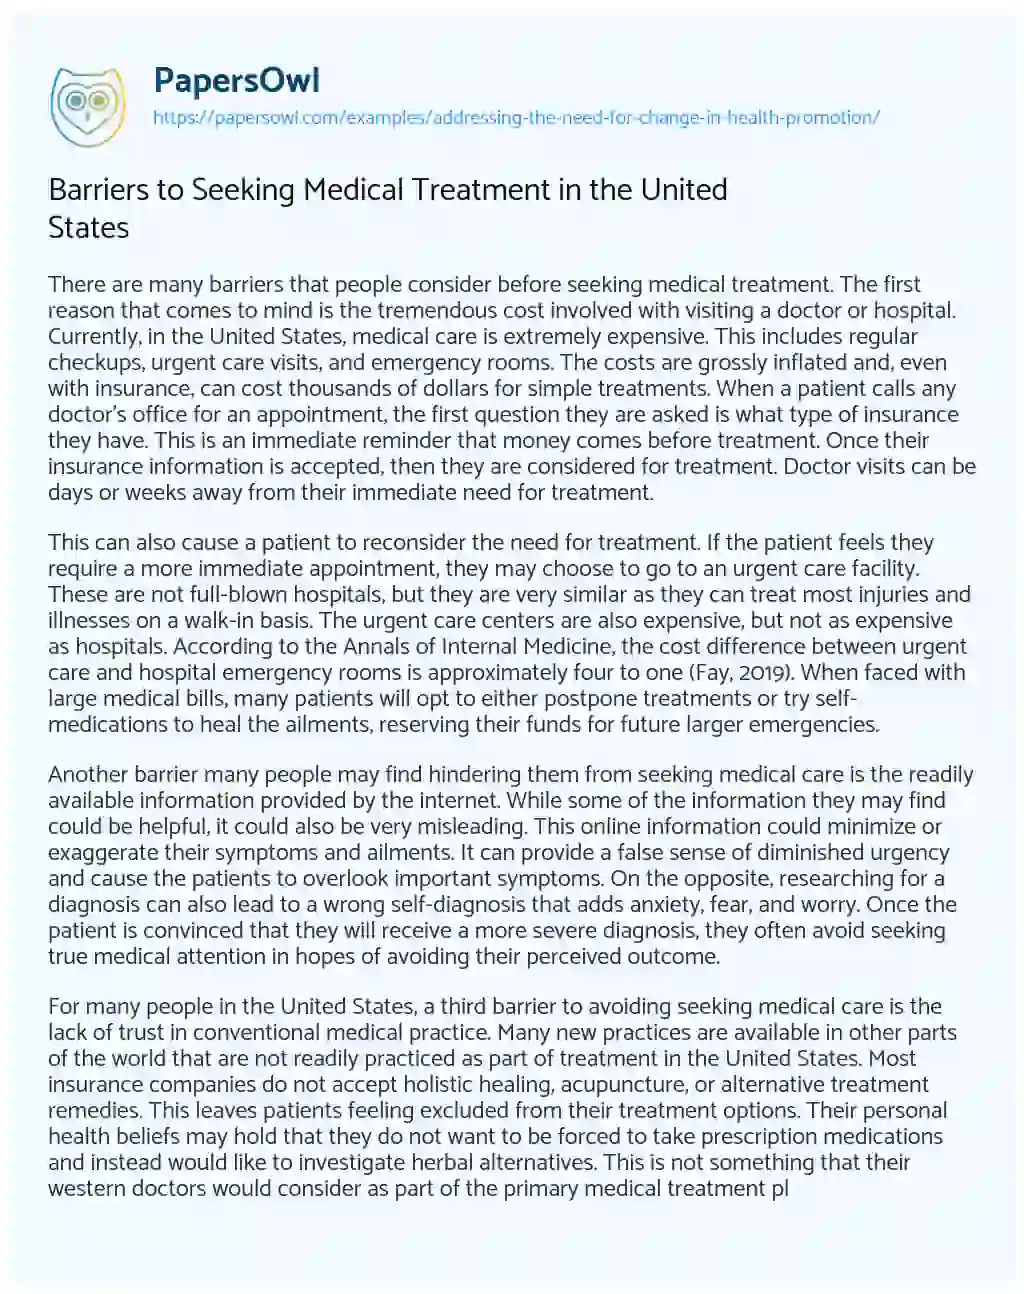 Essay on Barriers to Seeking Medical Treatment in the United States